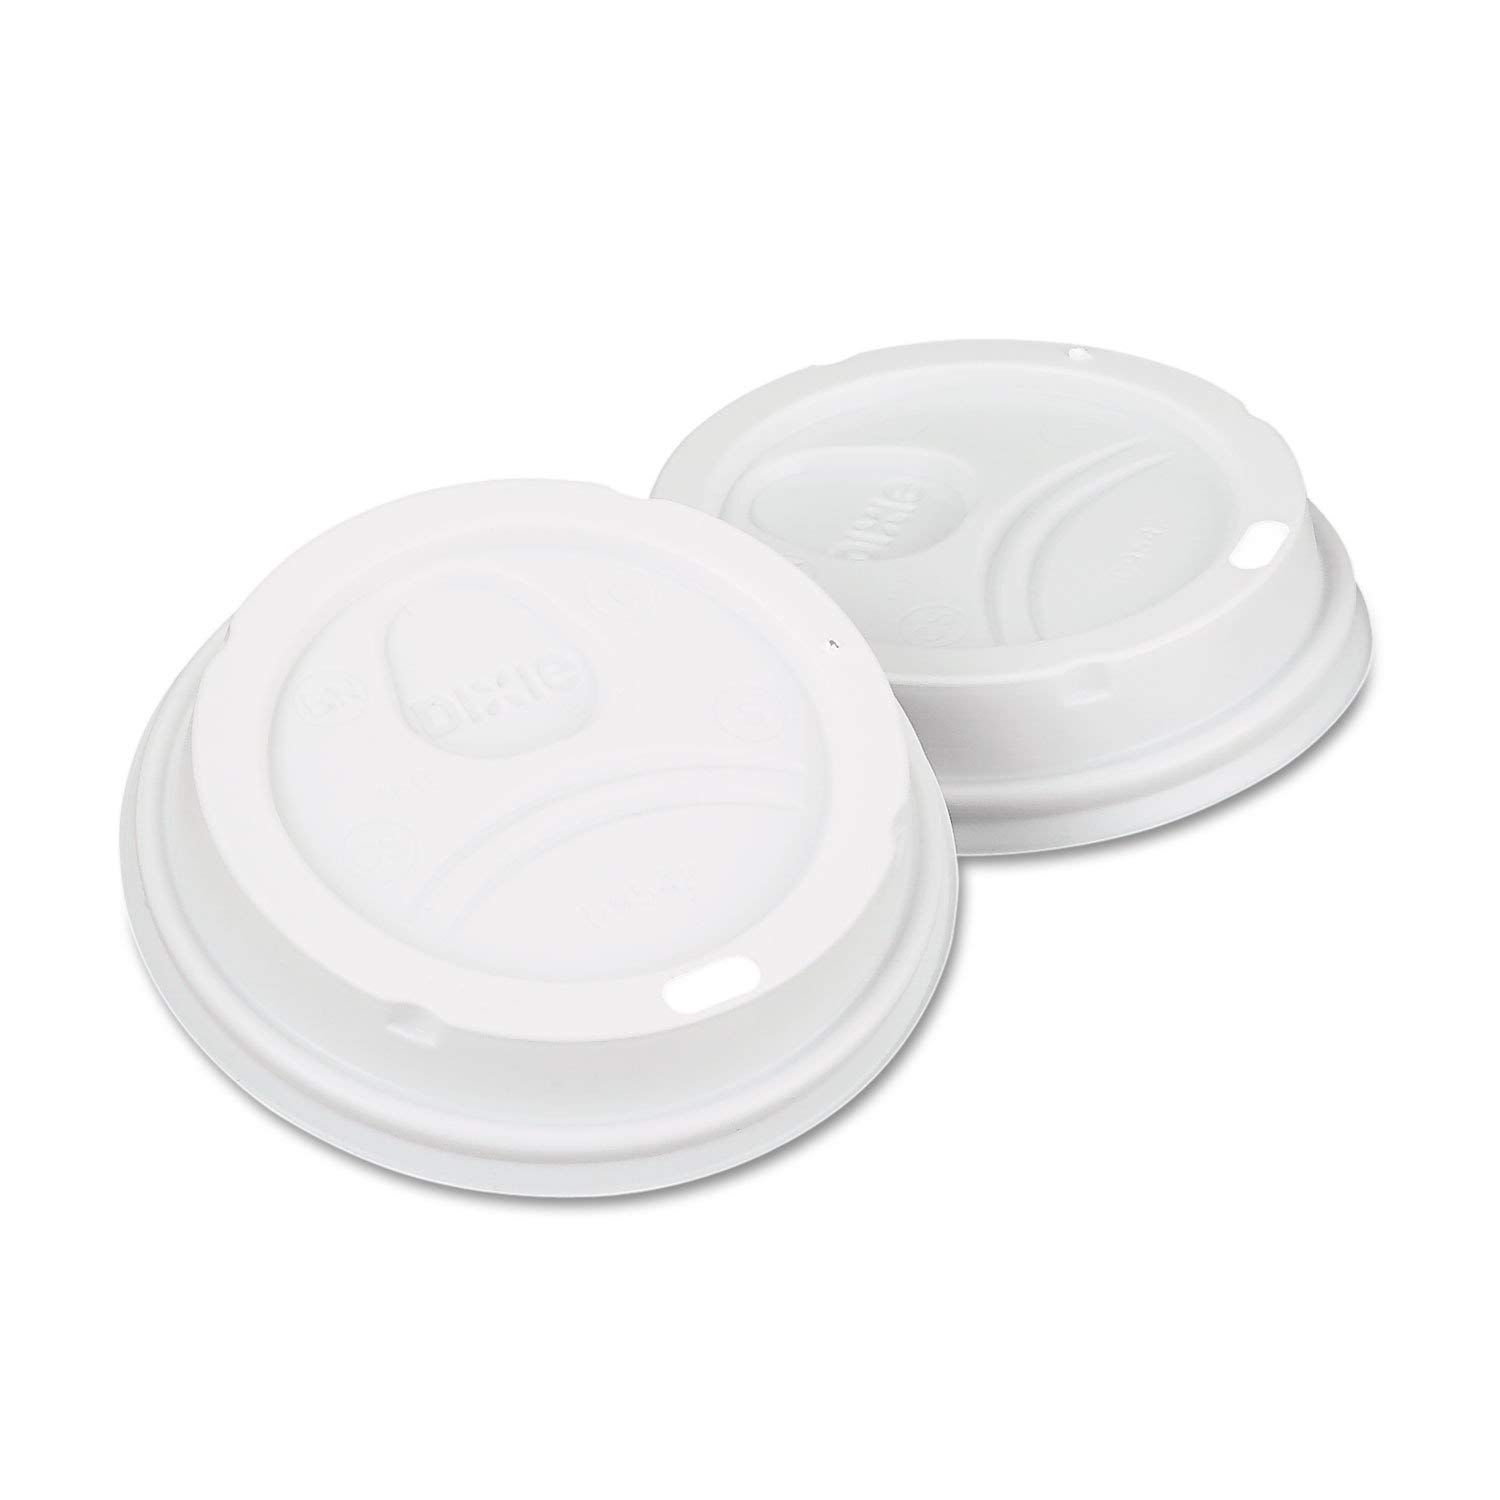 Dixie D9542W Dome Lid for 10-16 Ounce PerfecTouch Cups and 12-20 Ounce Paper Hot Cups, White 100 Lids